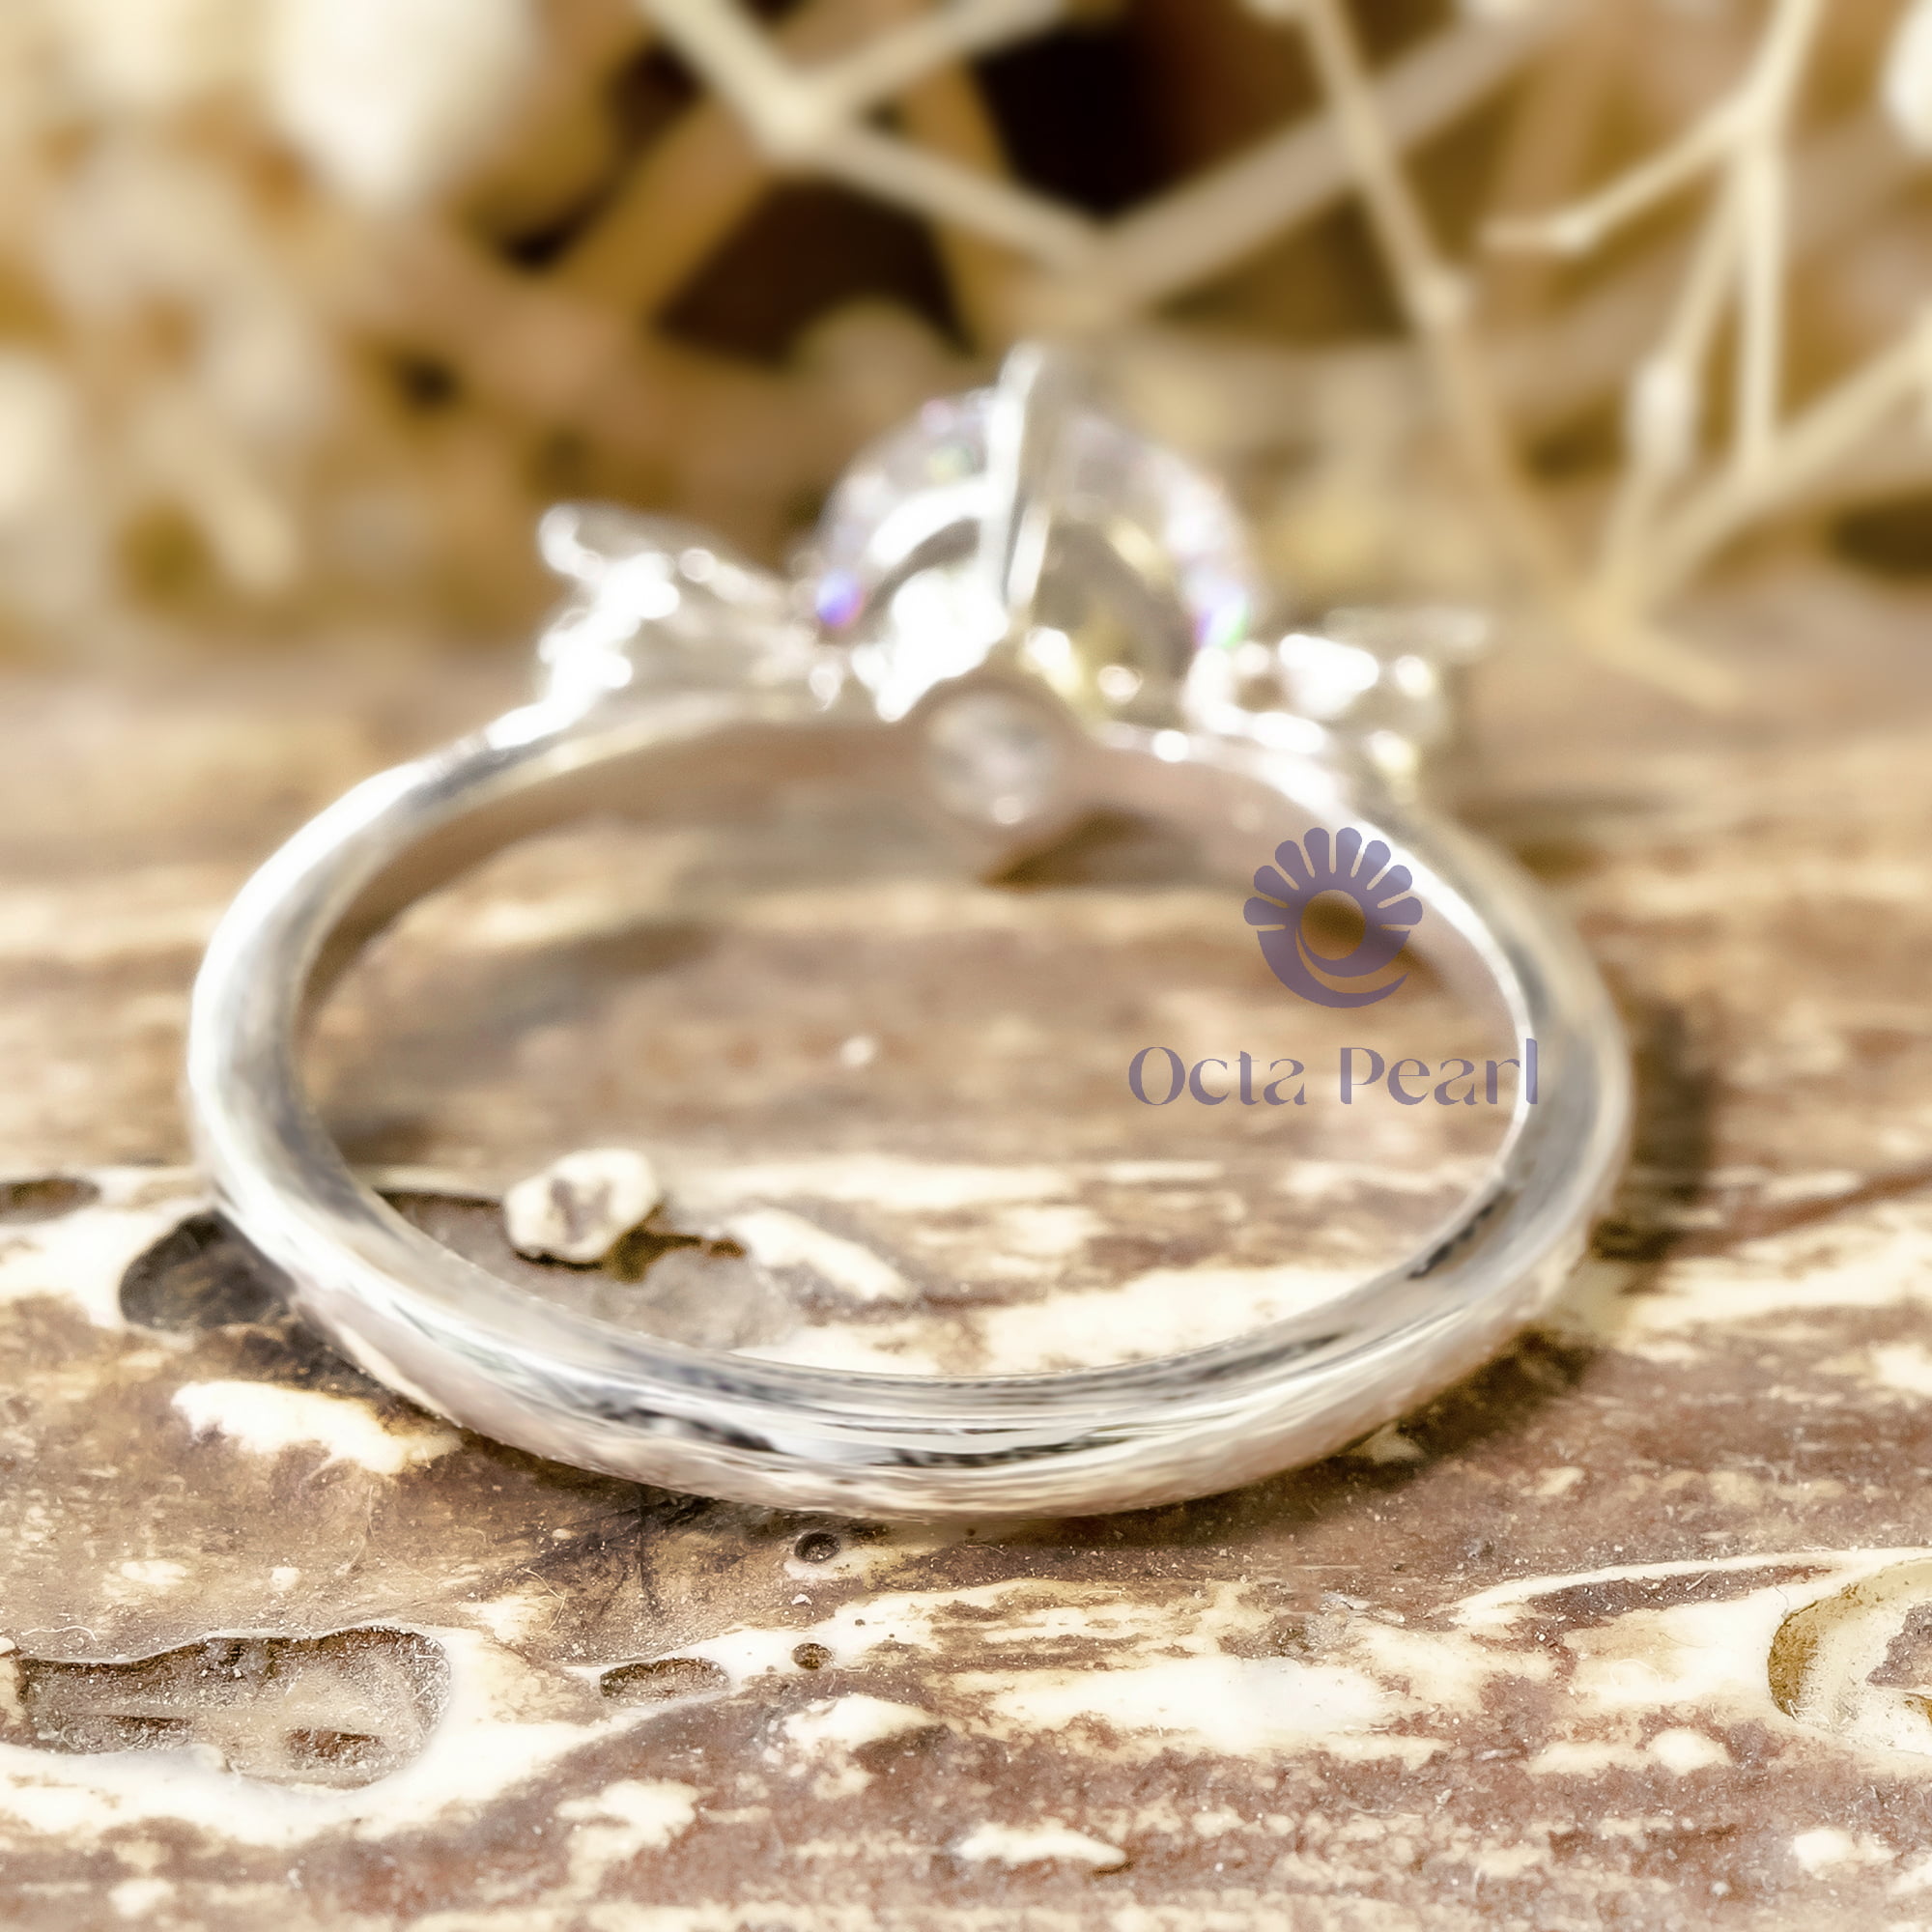 Round Moissanite Elephant Inspired Solitaire Birthday Gift Ring For Child